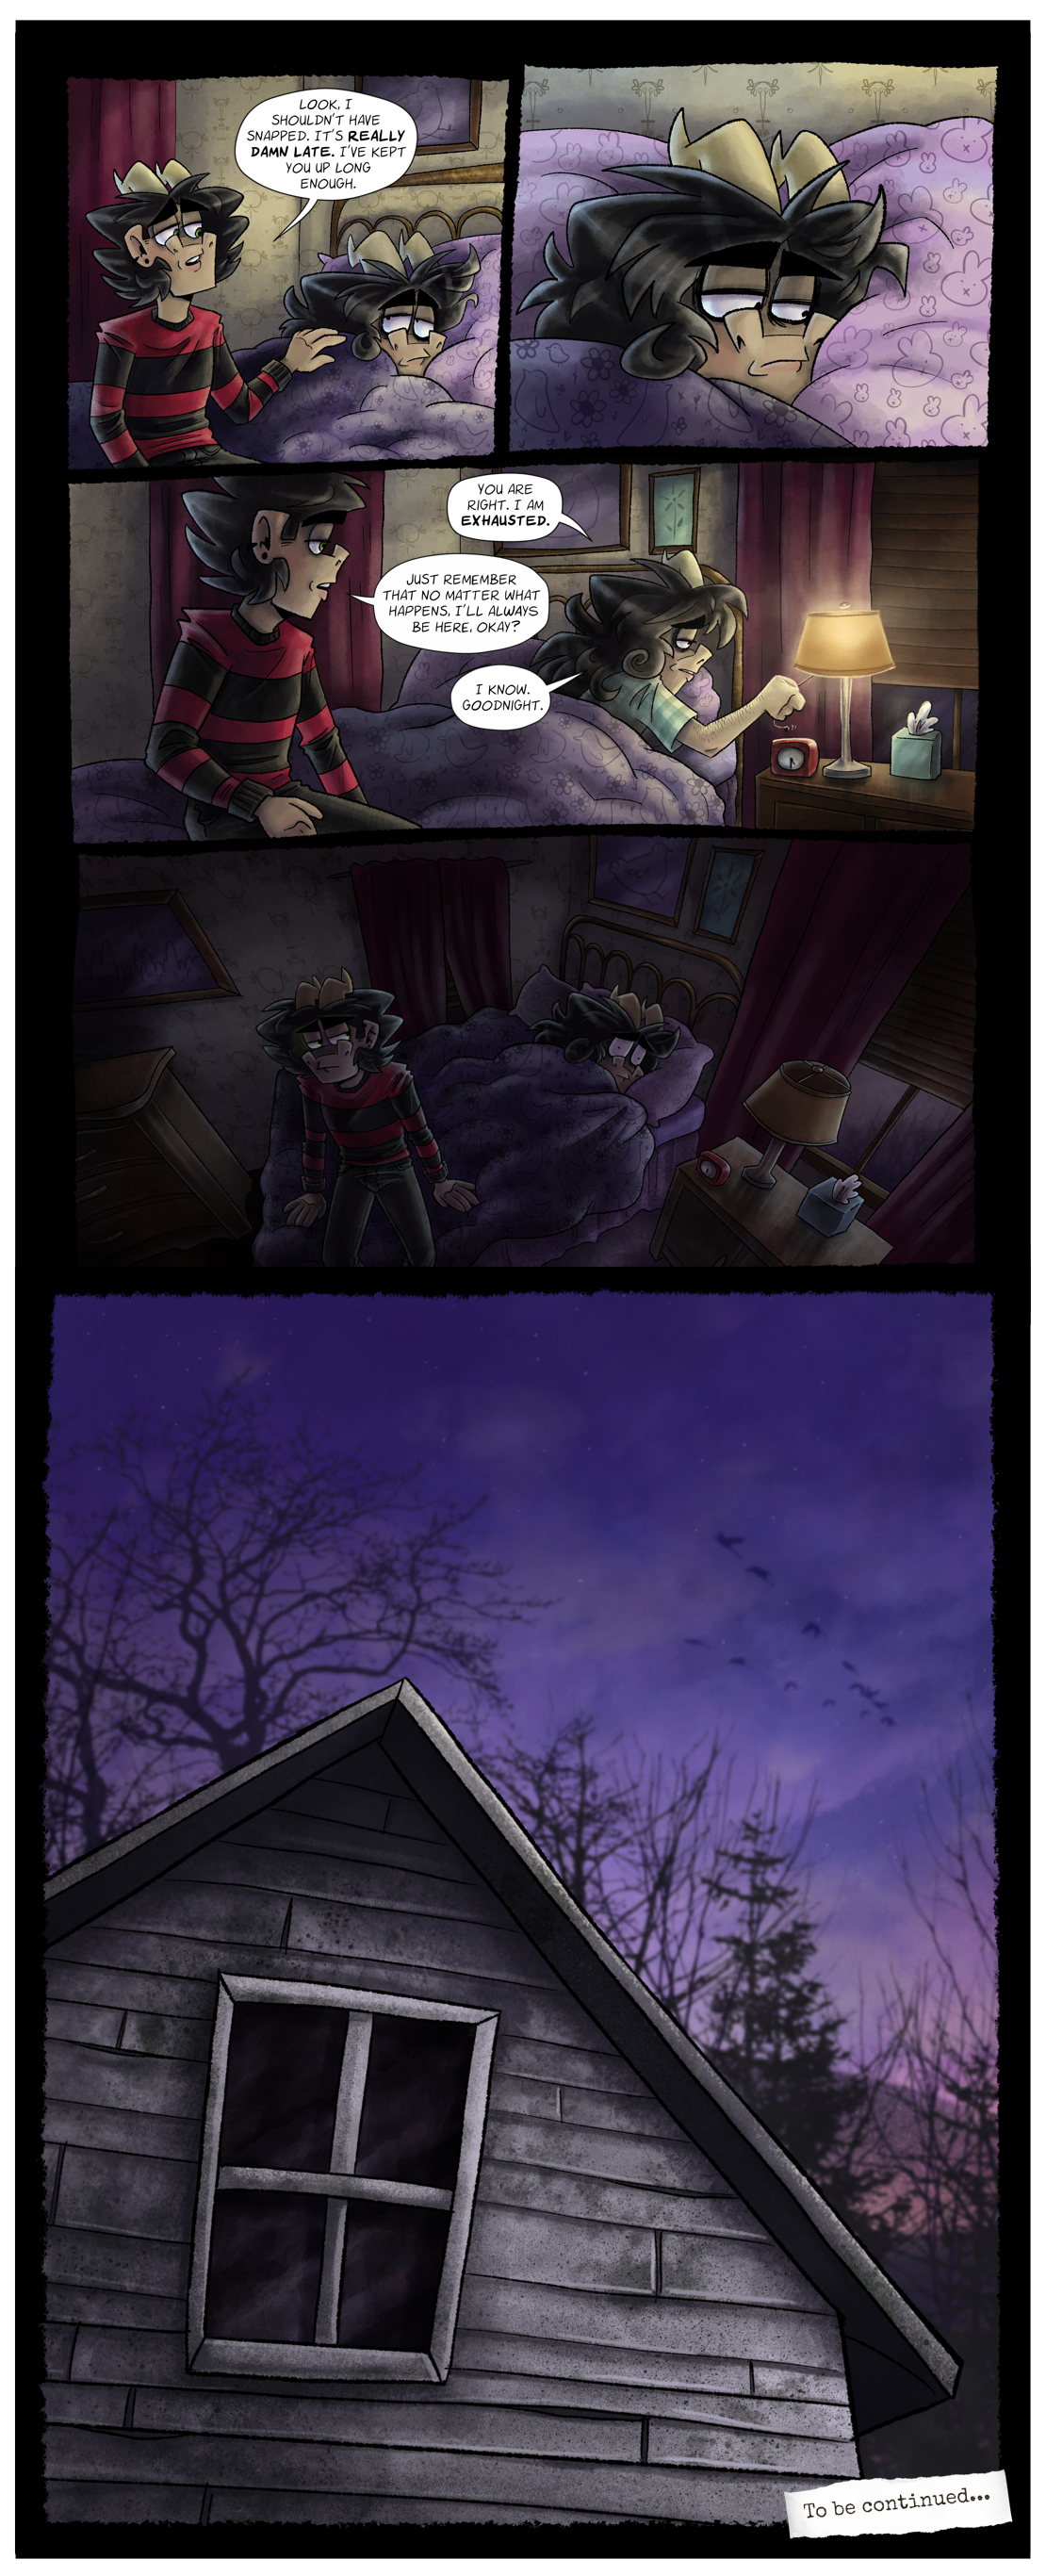 Ch 2 Page 43 & 44: Goodnight, Sweet Prince